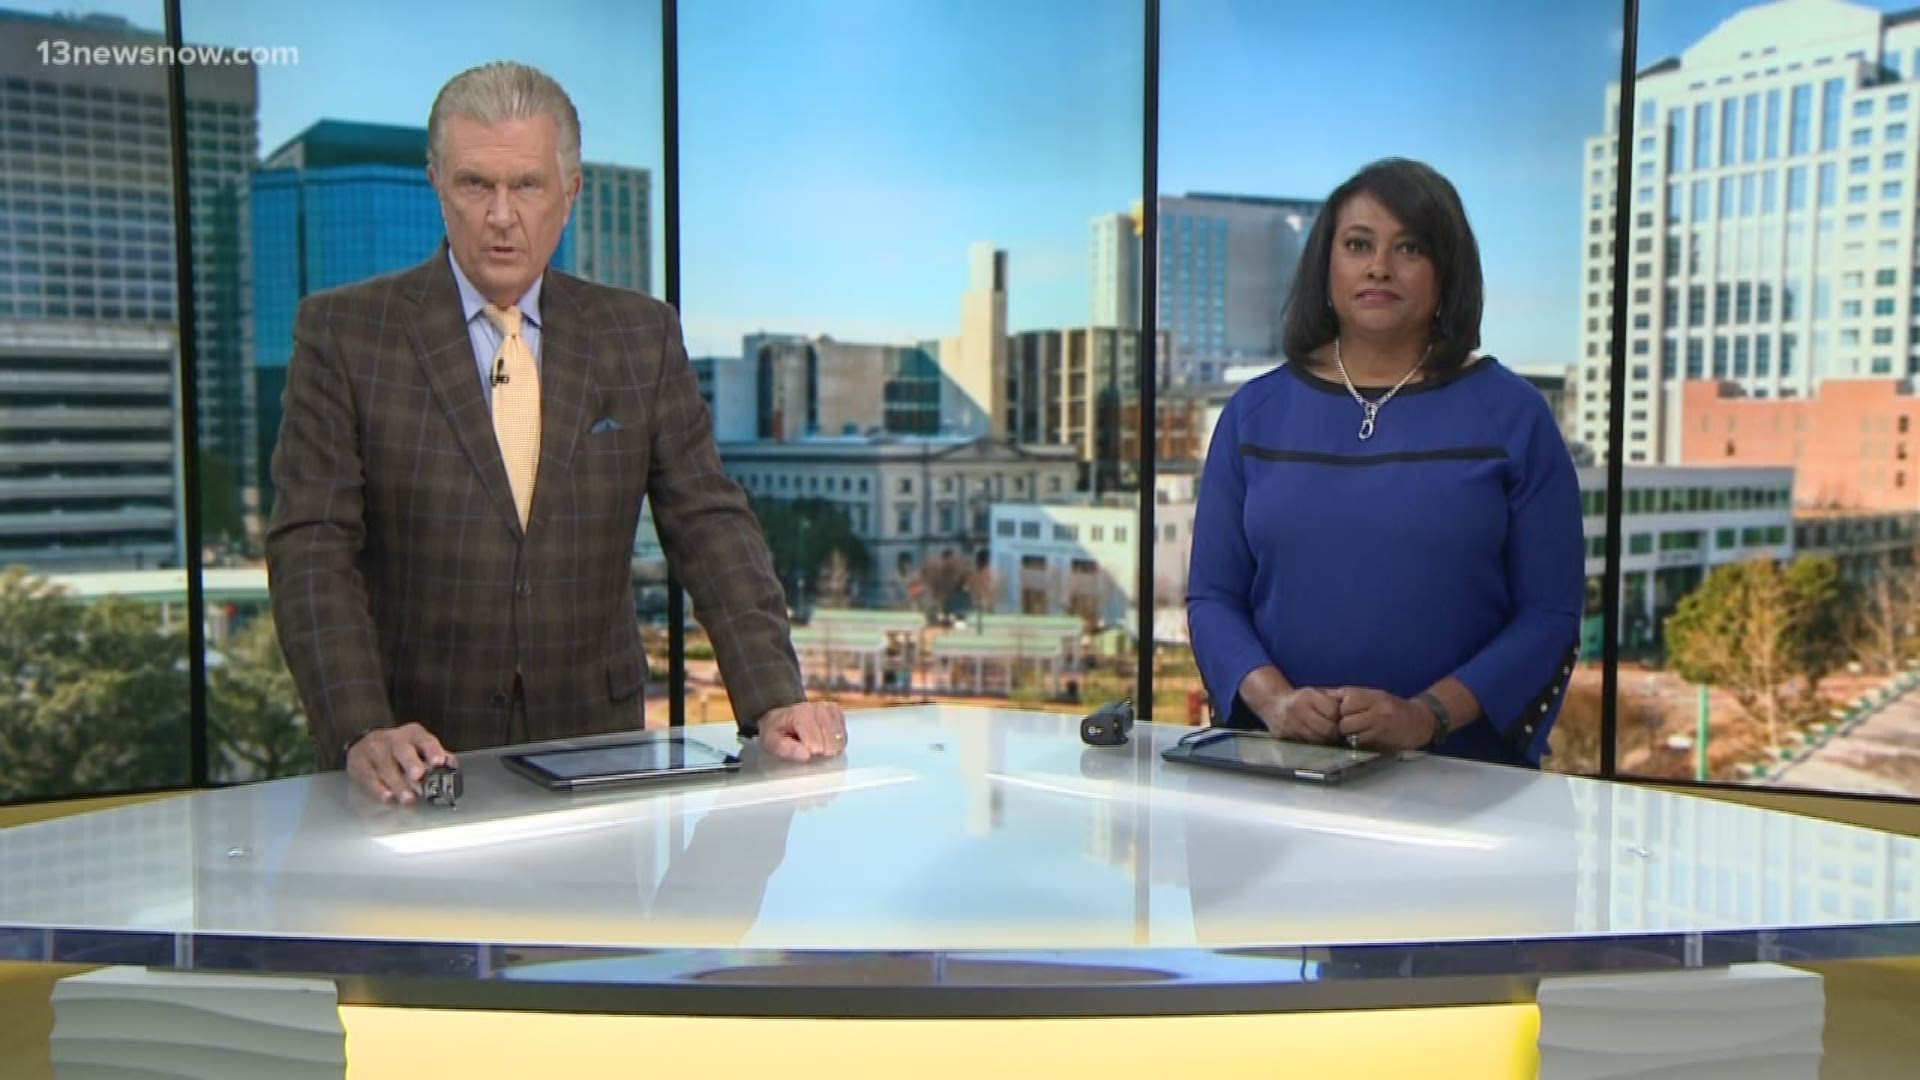 13News Now top headlines at 5 p.m. with Janet Roach and David Alan for October 17.